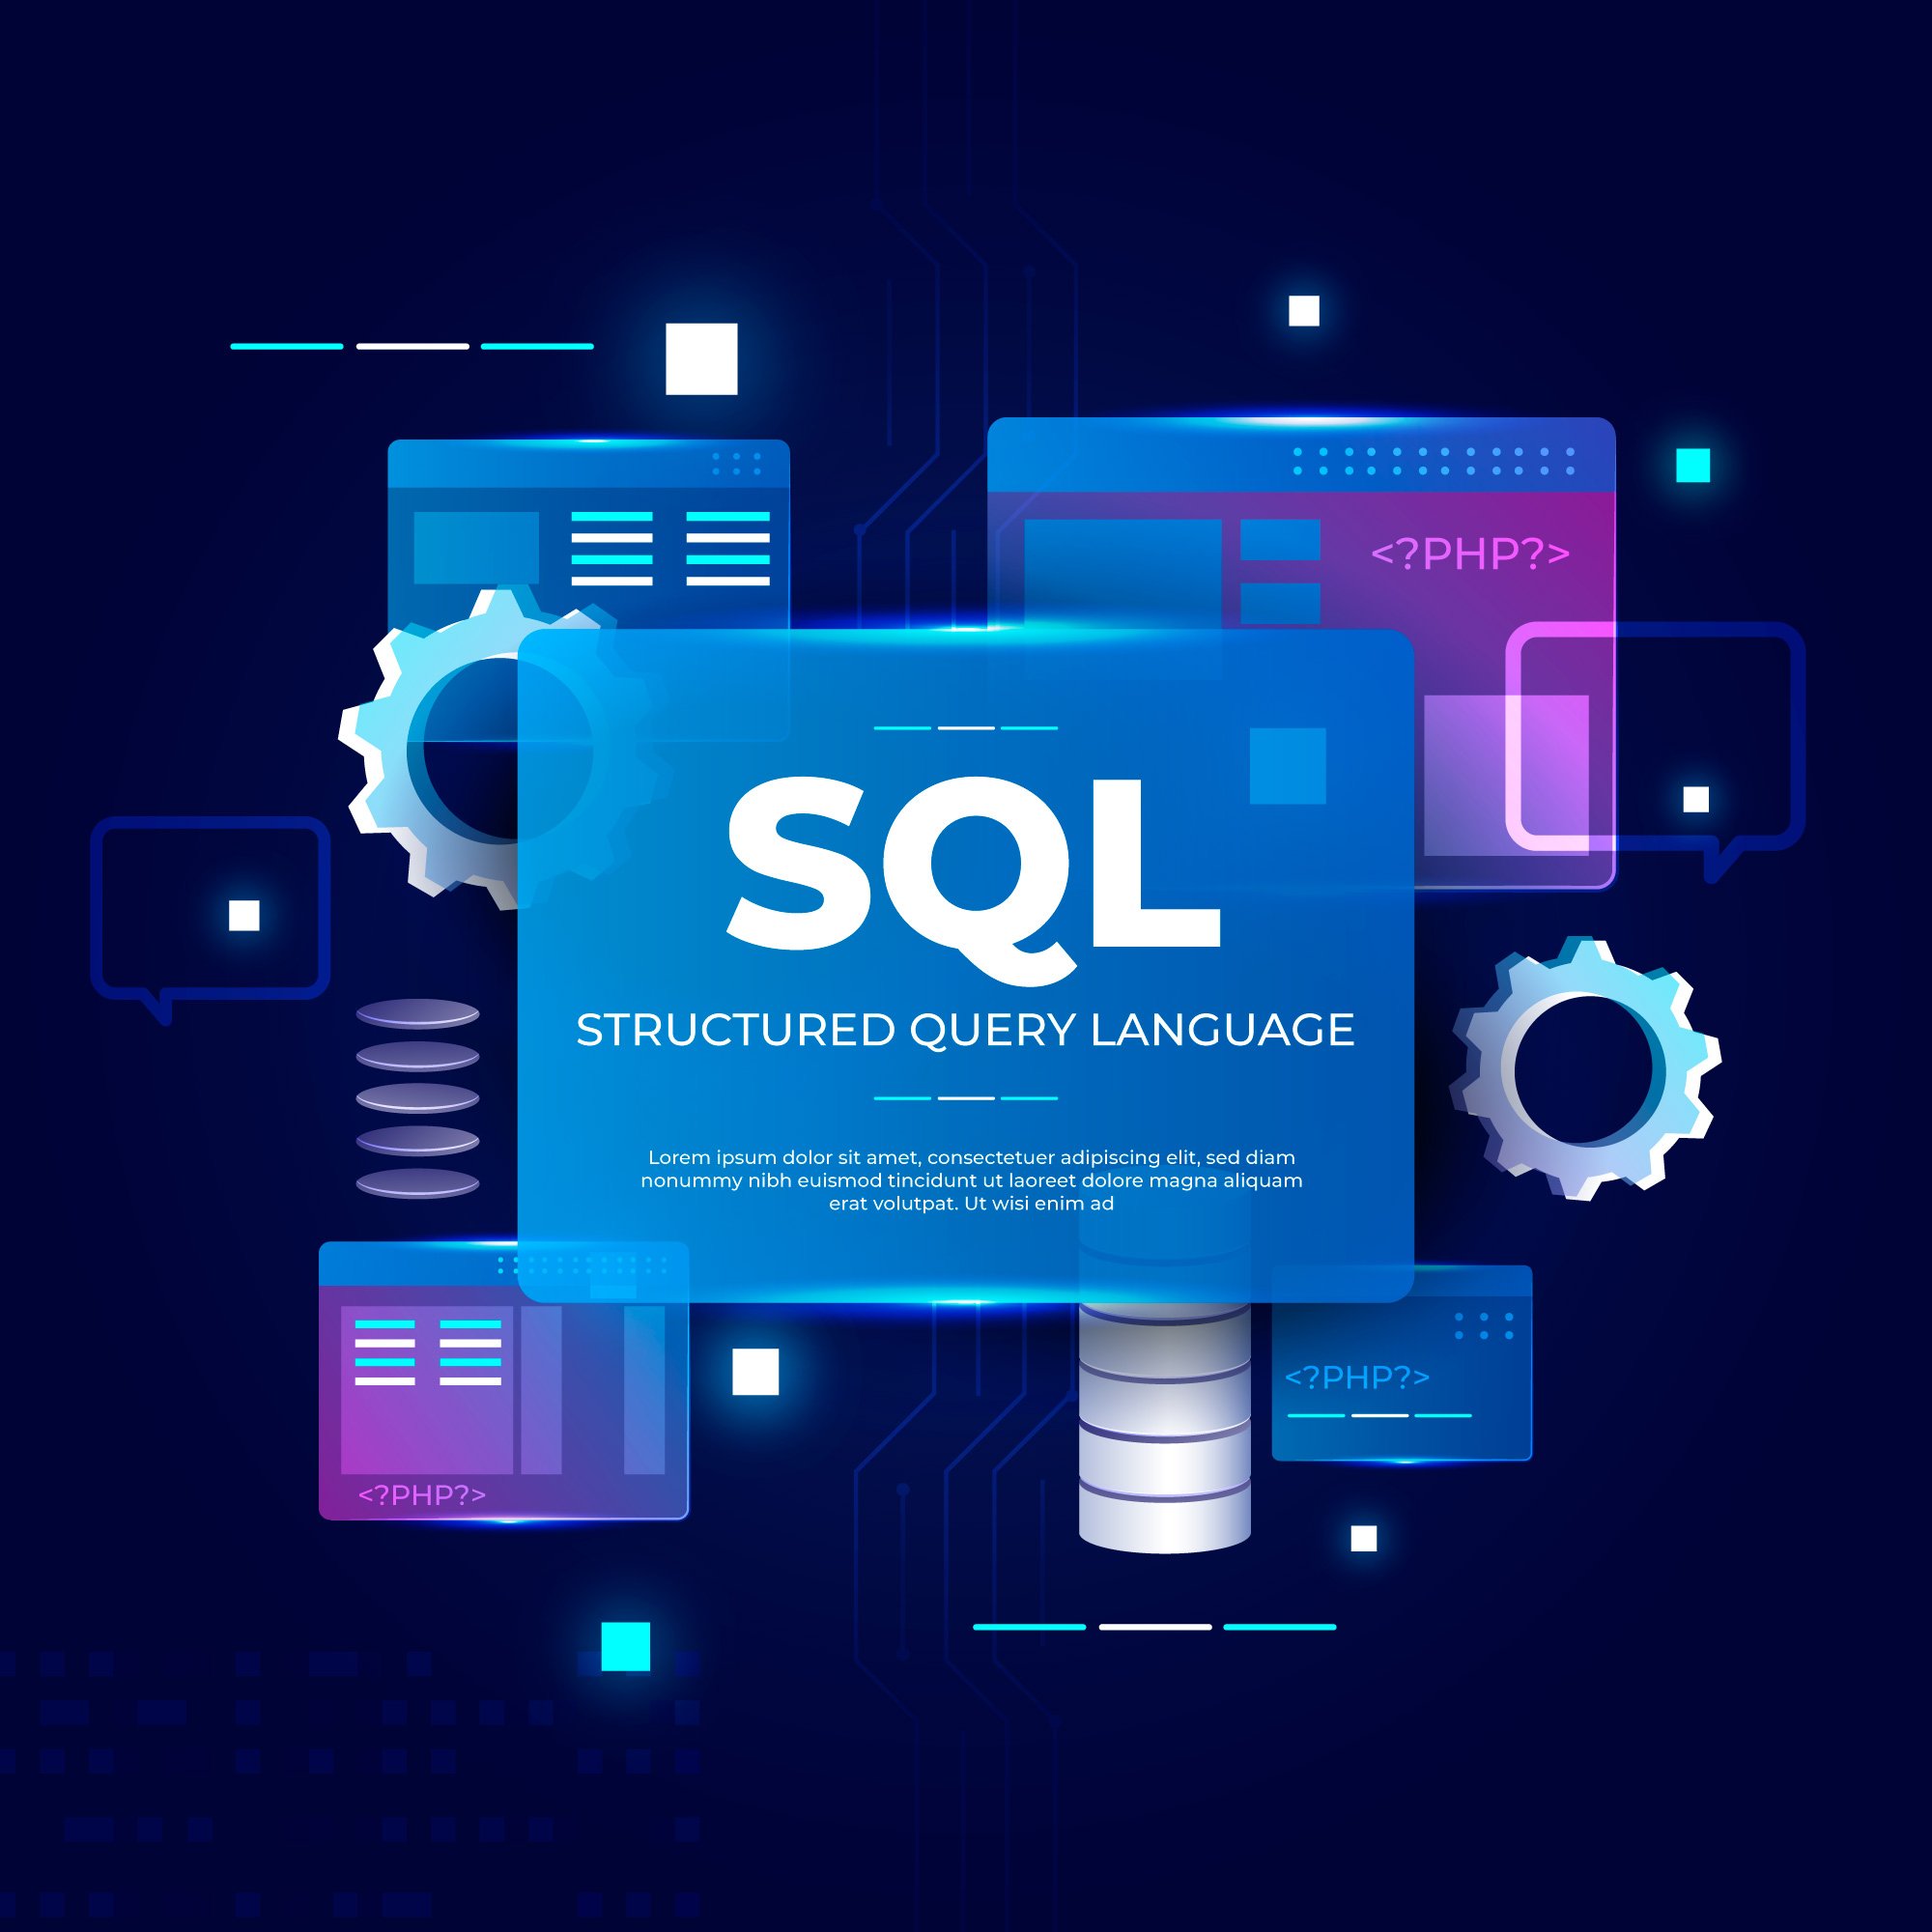 The 5 best university courses to learn databases and SQL